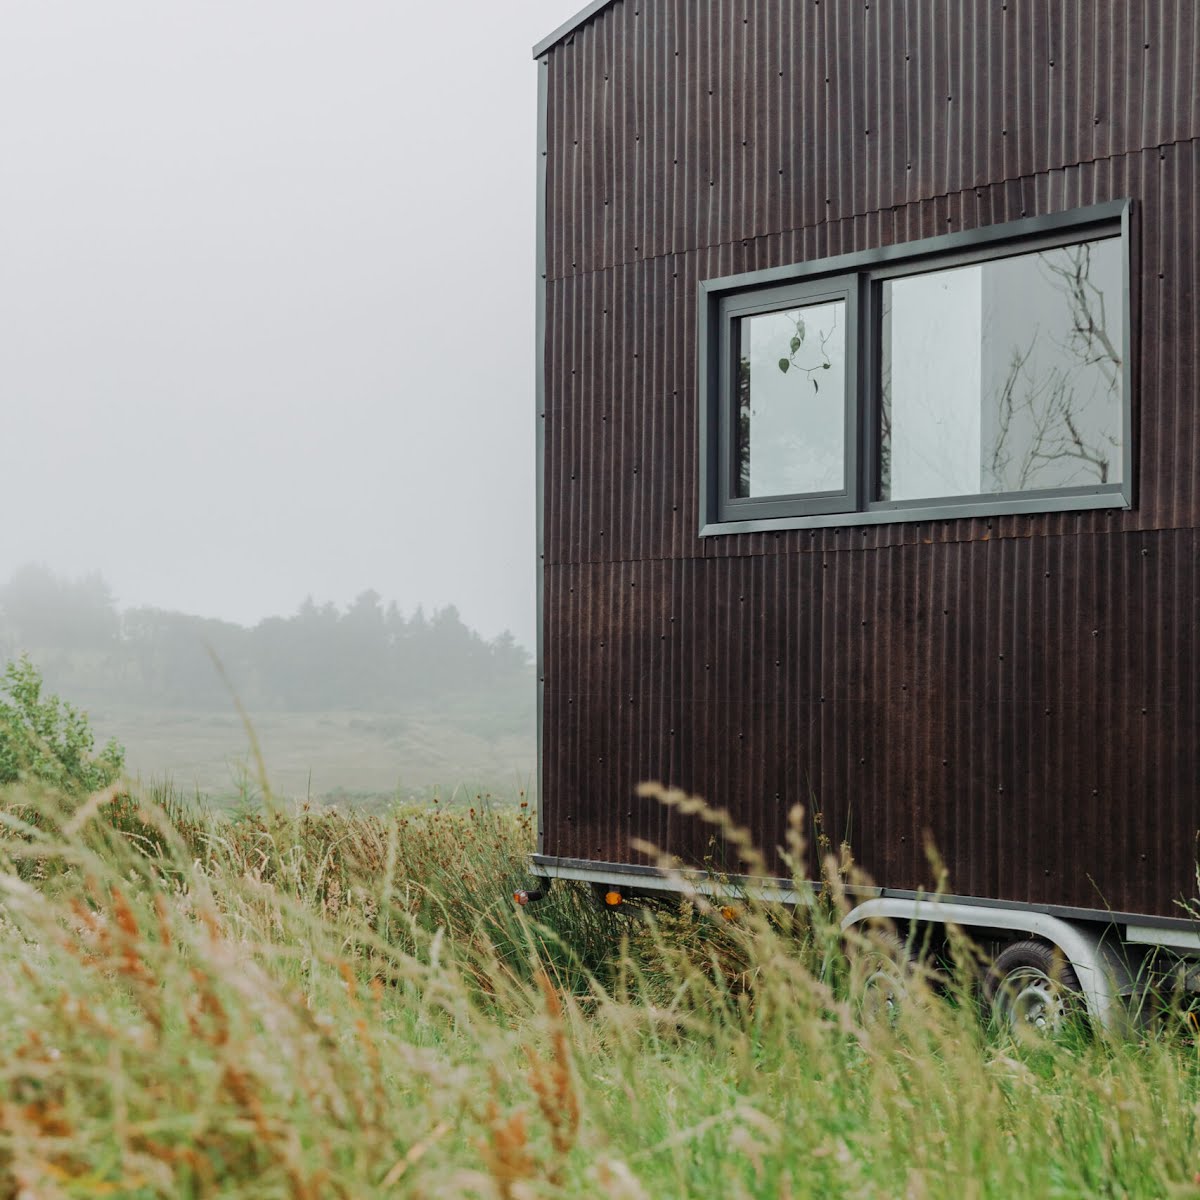 Tigíns are built on trailers specially made in the Netherlands. Wheels allow for the tiny houses to be less permanent (and not require planning permission).